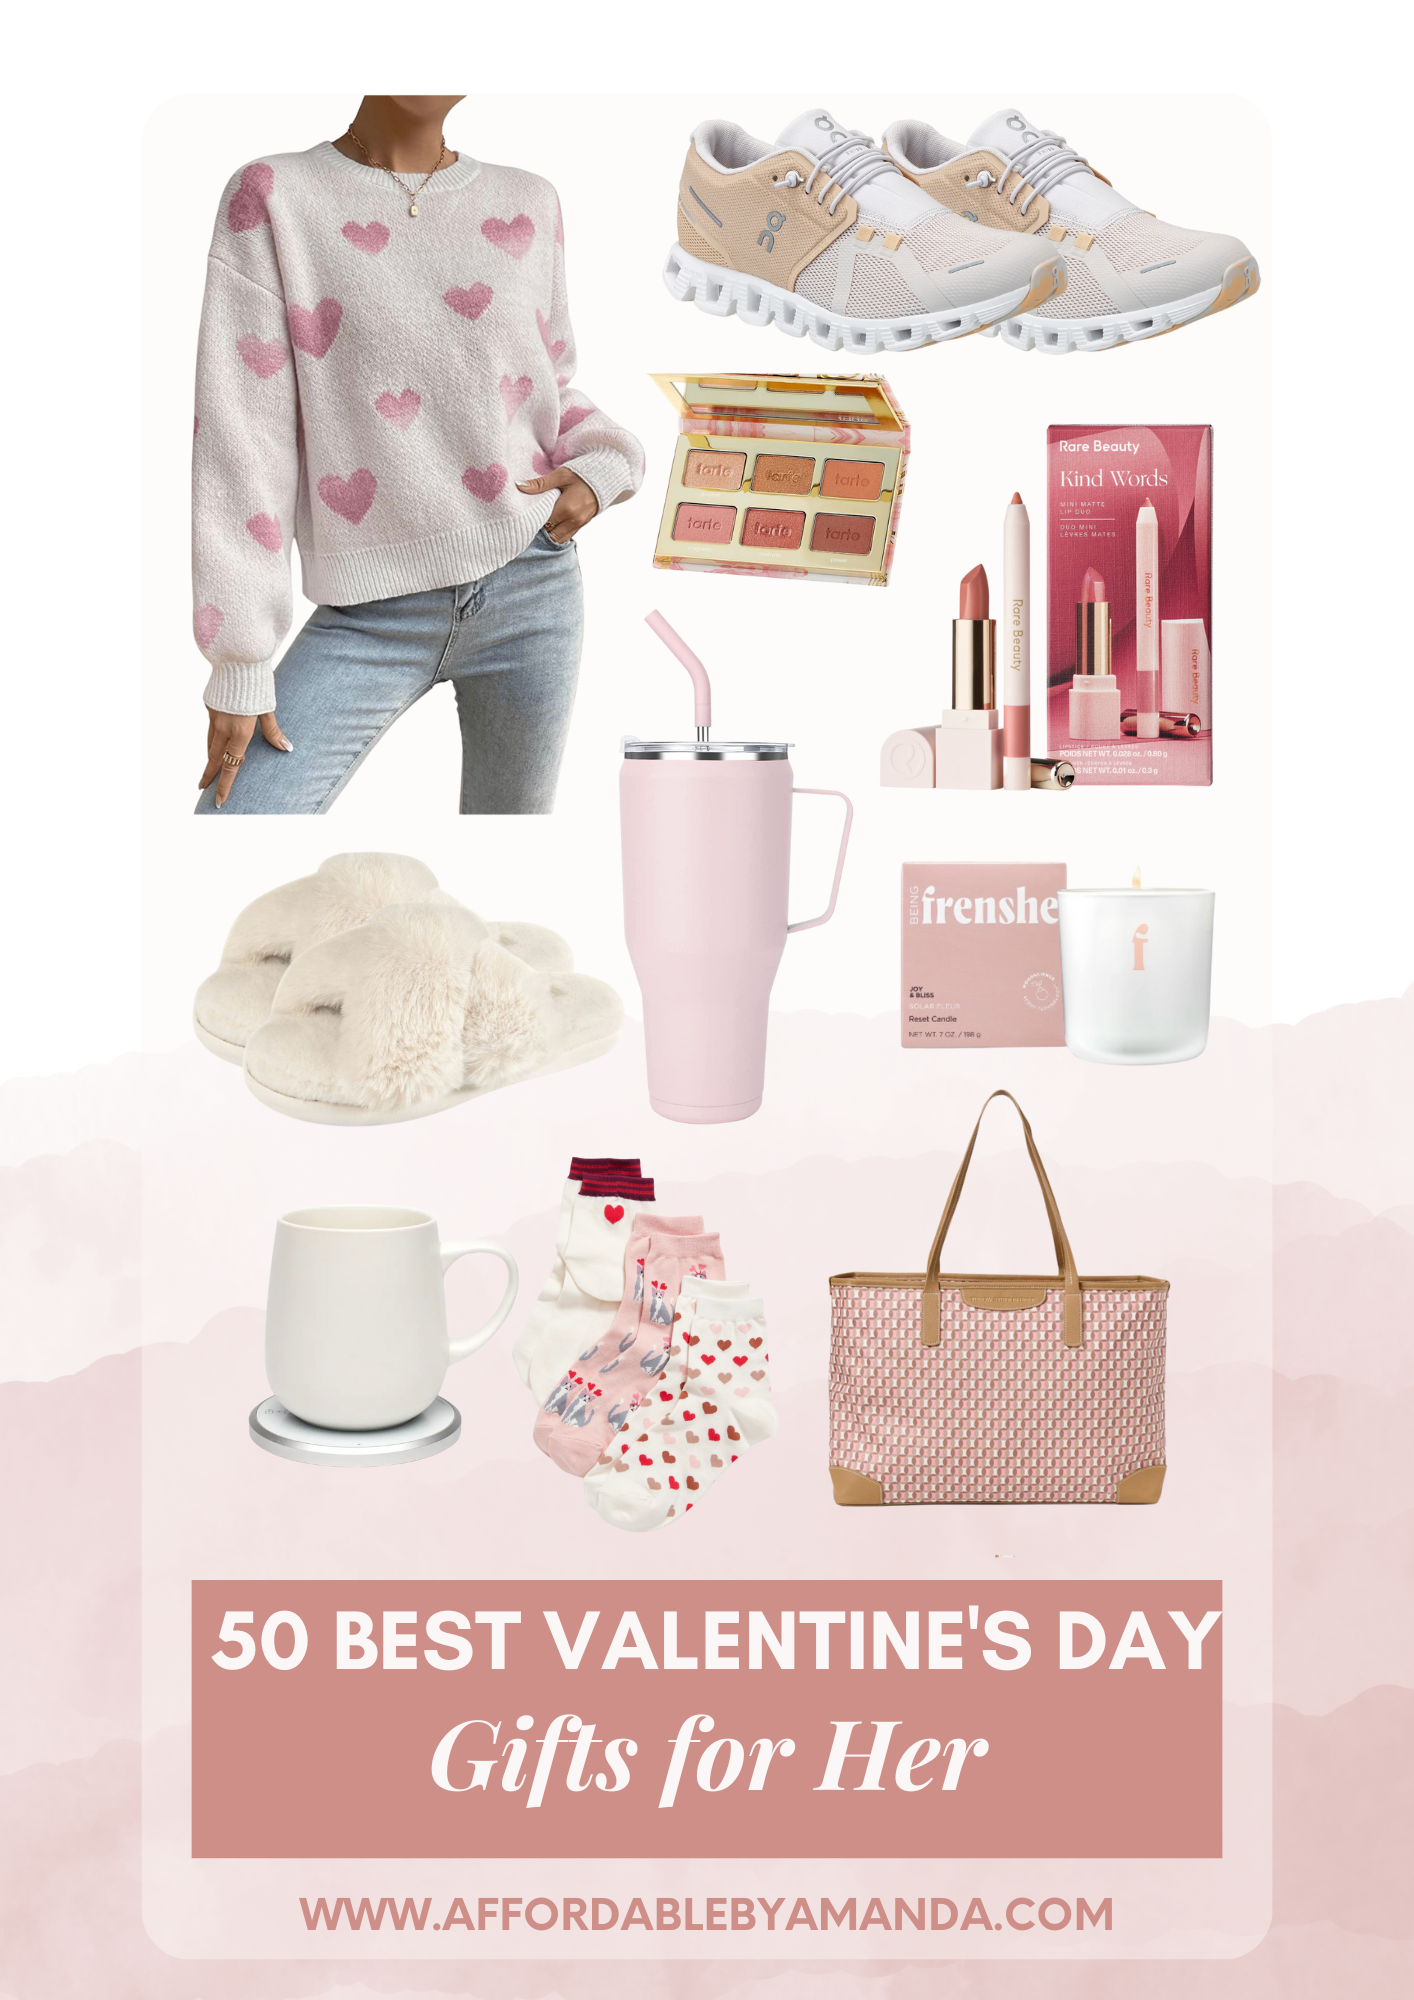 50 Best Valentine's Day Gifts for Her at Every Price | Affordable by Amanda